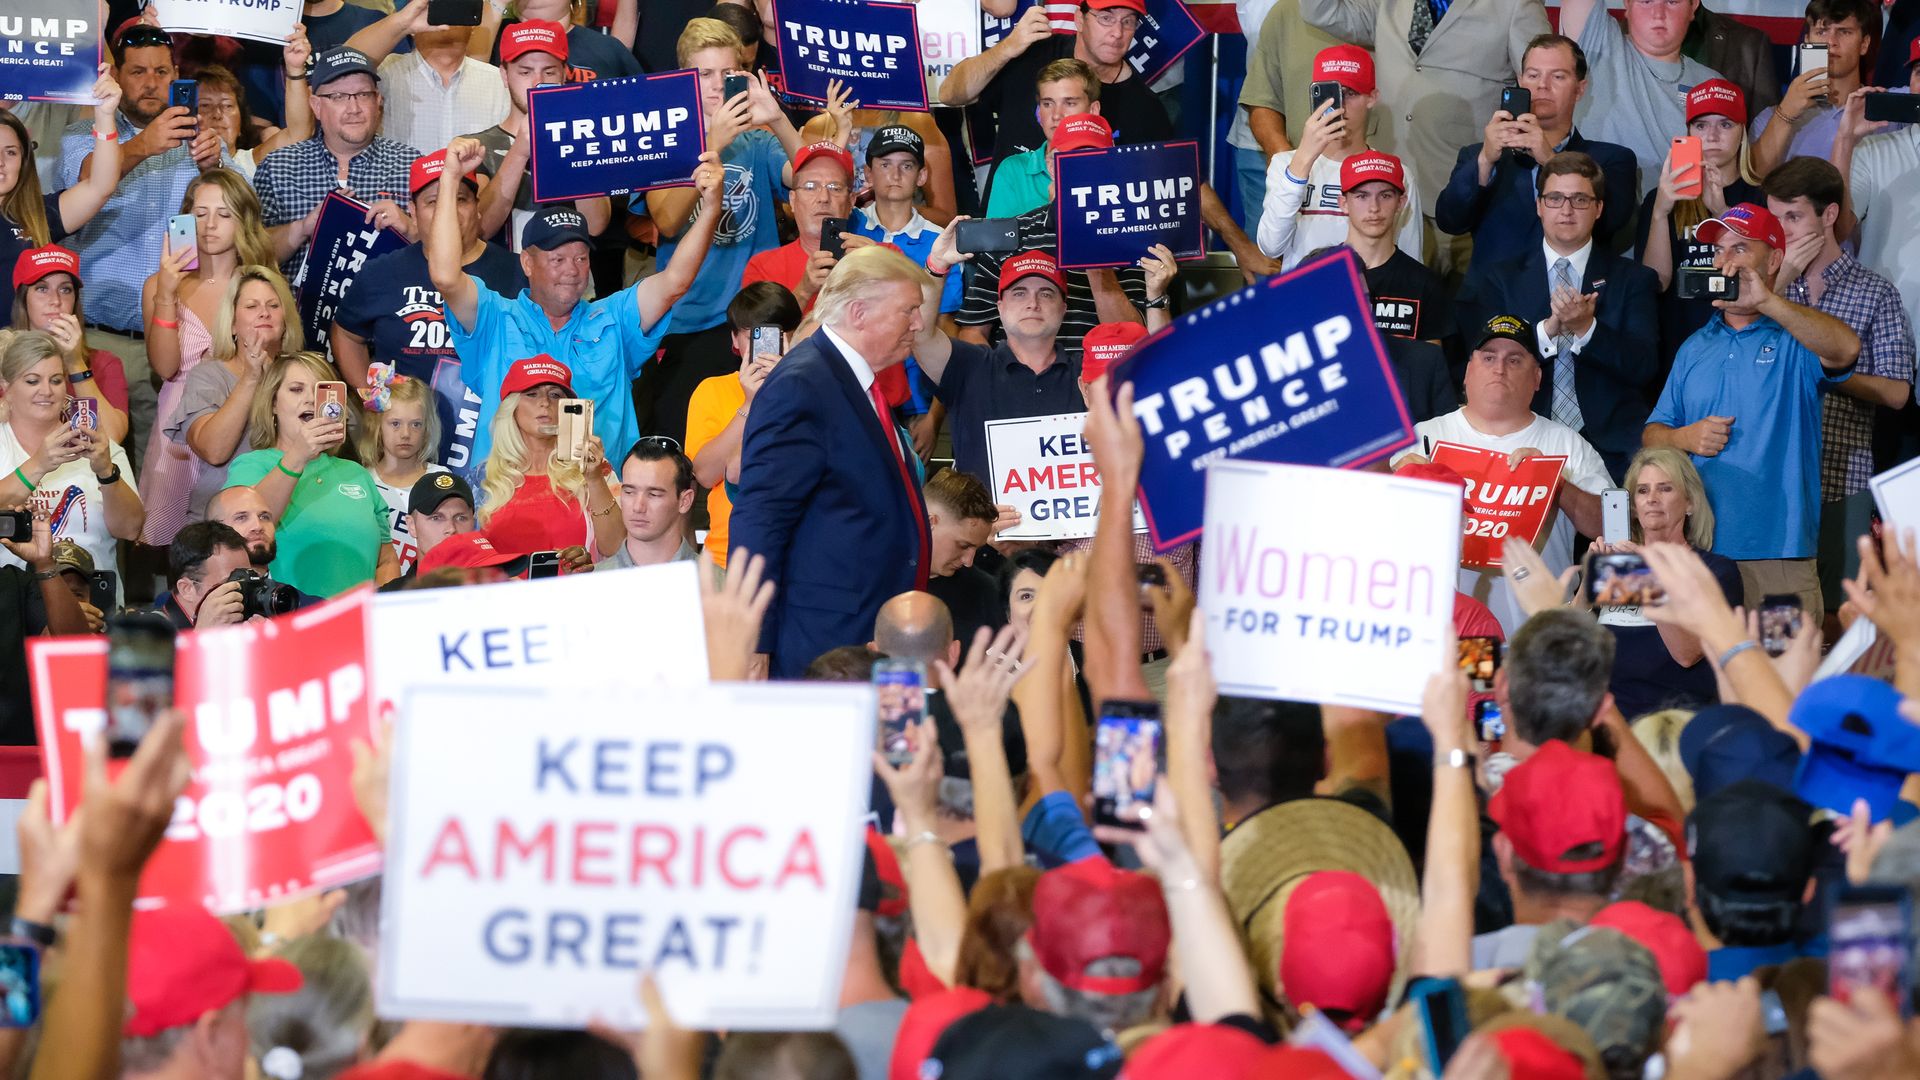 Trump walks through a crowd holding Trump Pence signs at a rally.